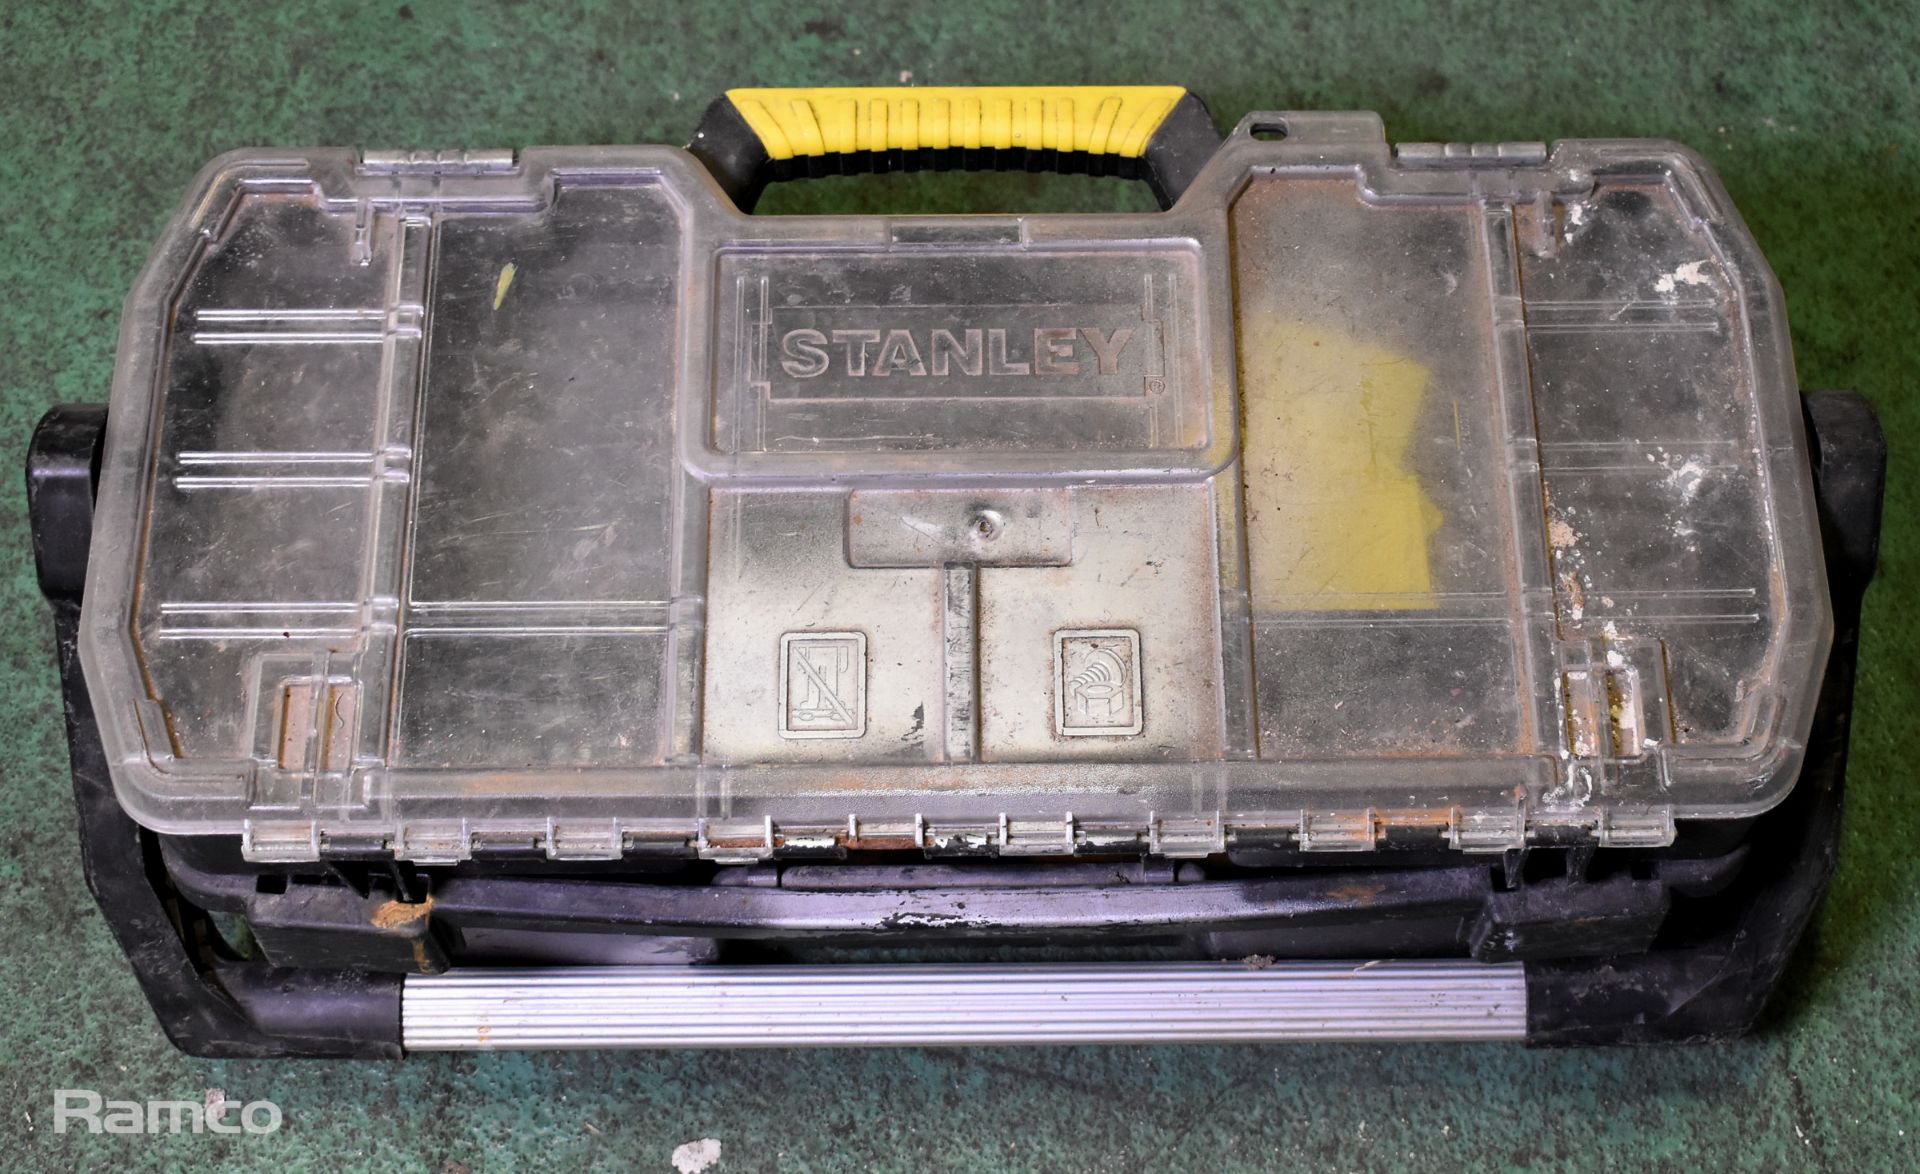 Tool Bag with linespray cans, Irwin Tool Bag, Stanley plastic toolbox, toolbox with tools - Image 9 of 12